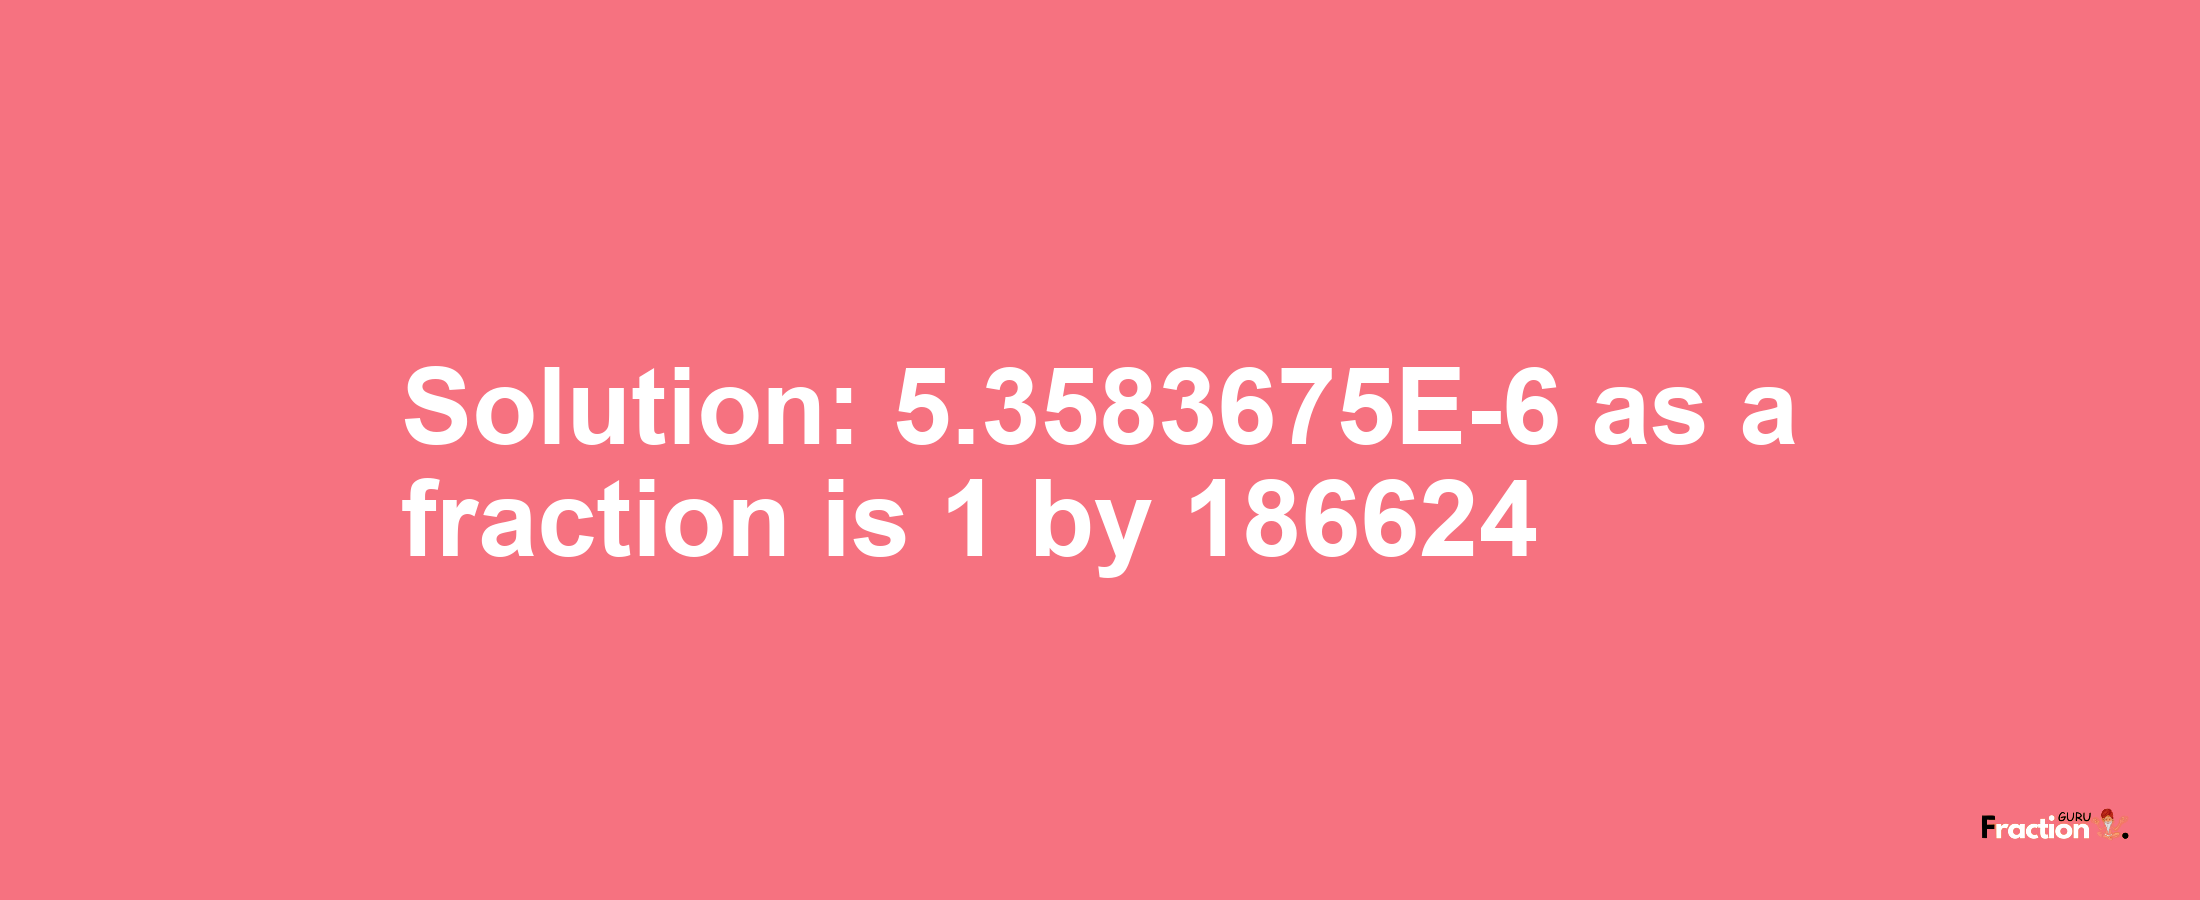 Solution:5.3583675E-6 as a fraction is 1/186624